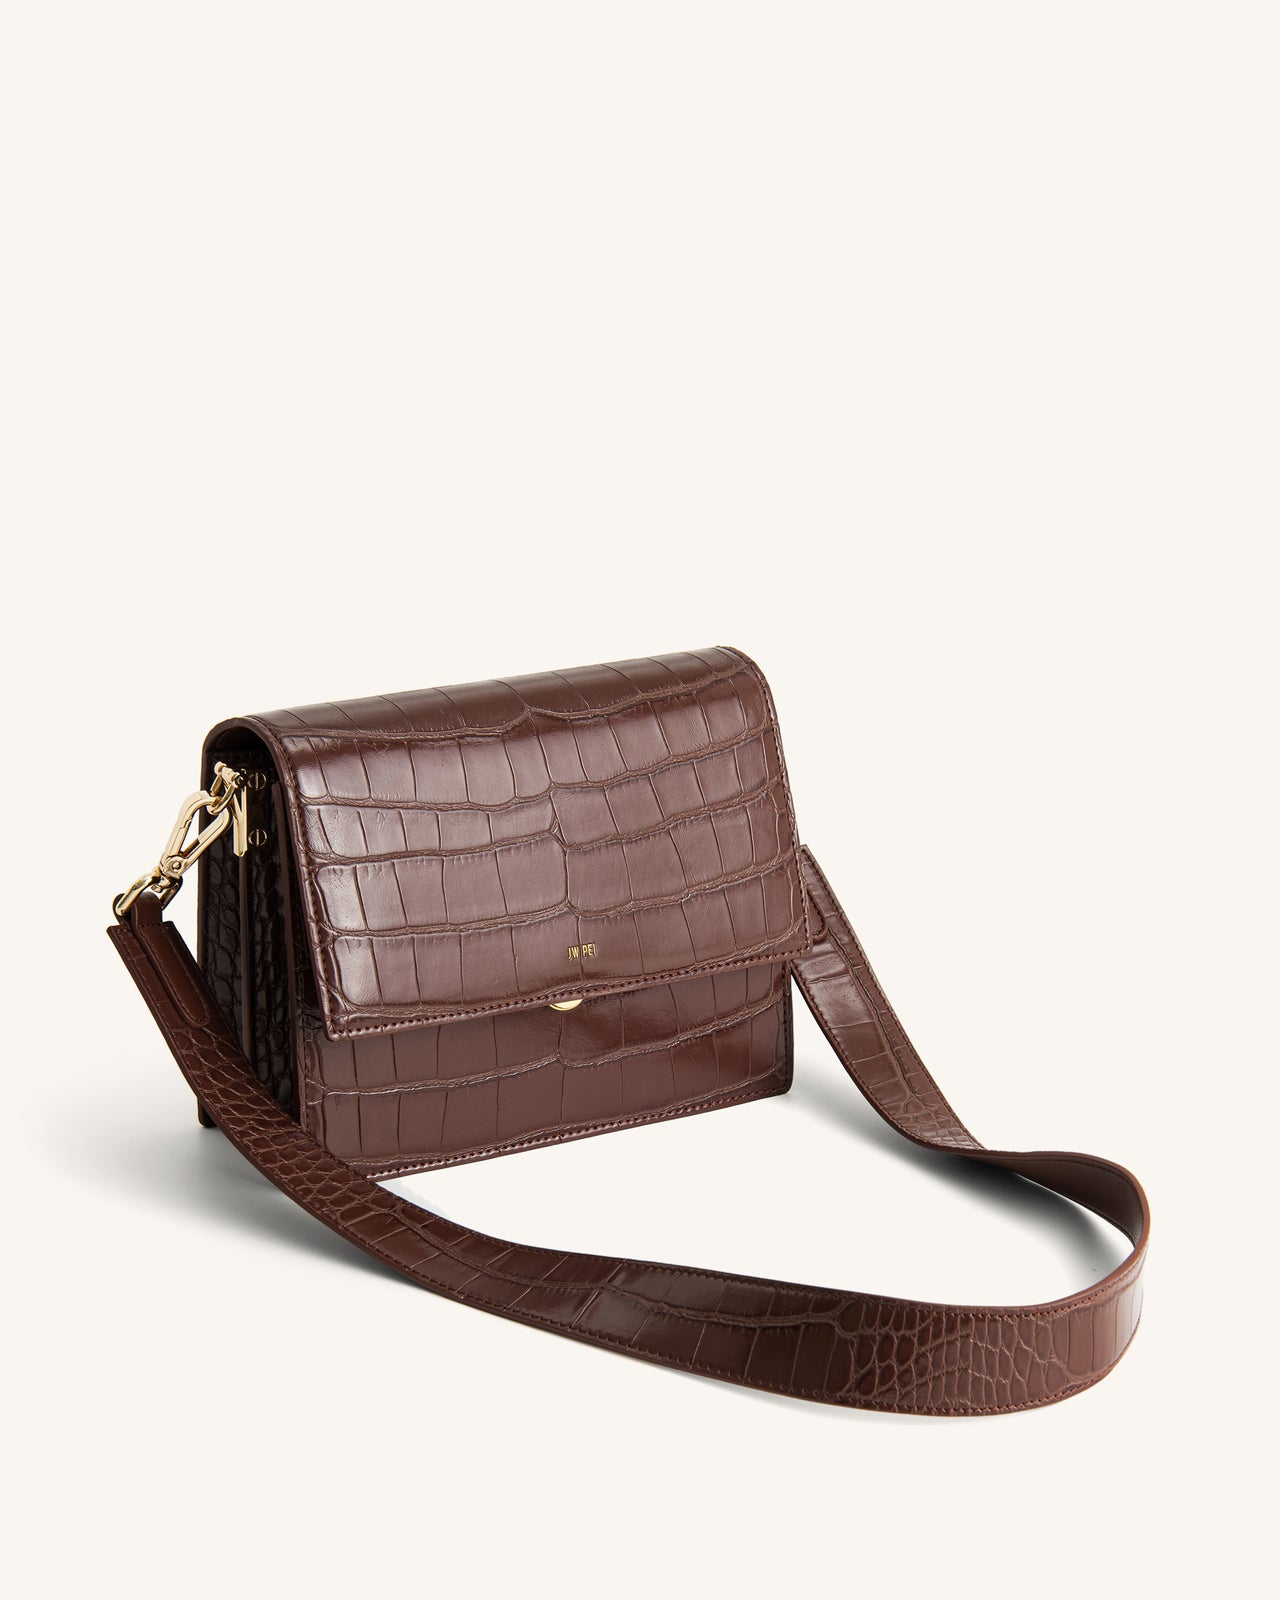 JW Pei Tina Quilted Chain Crossbody